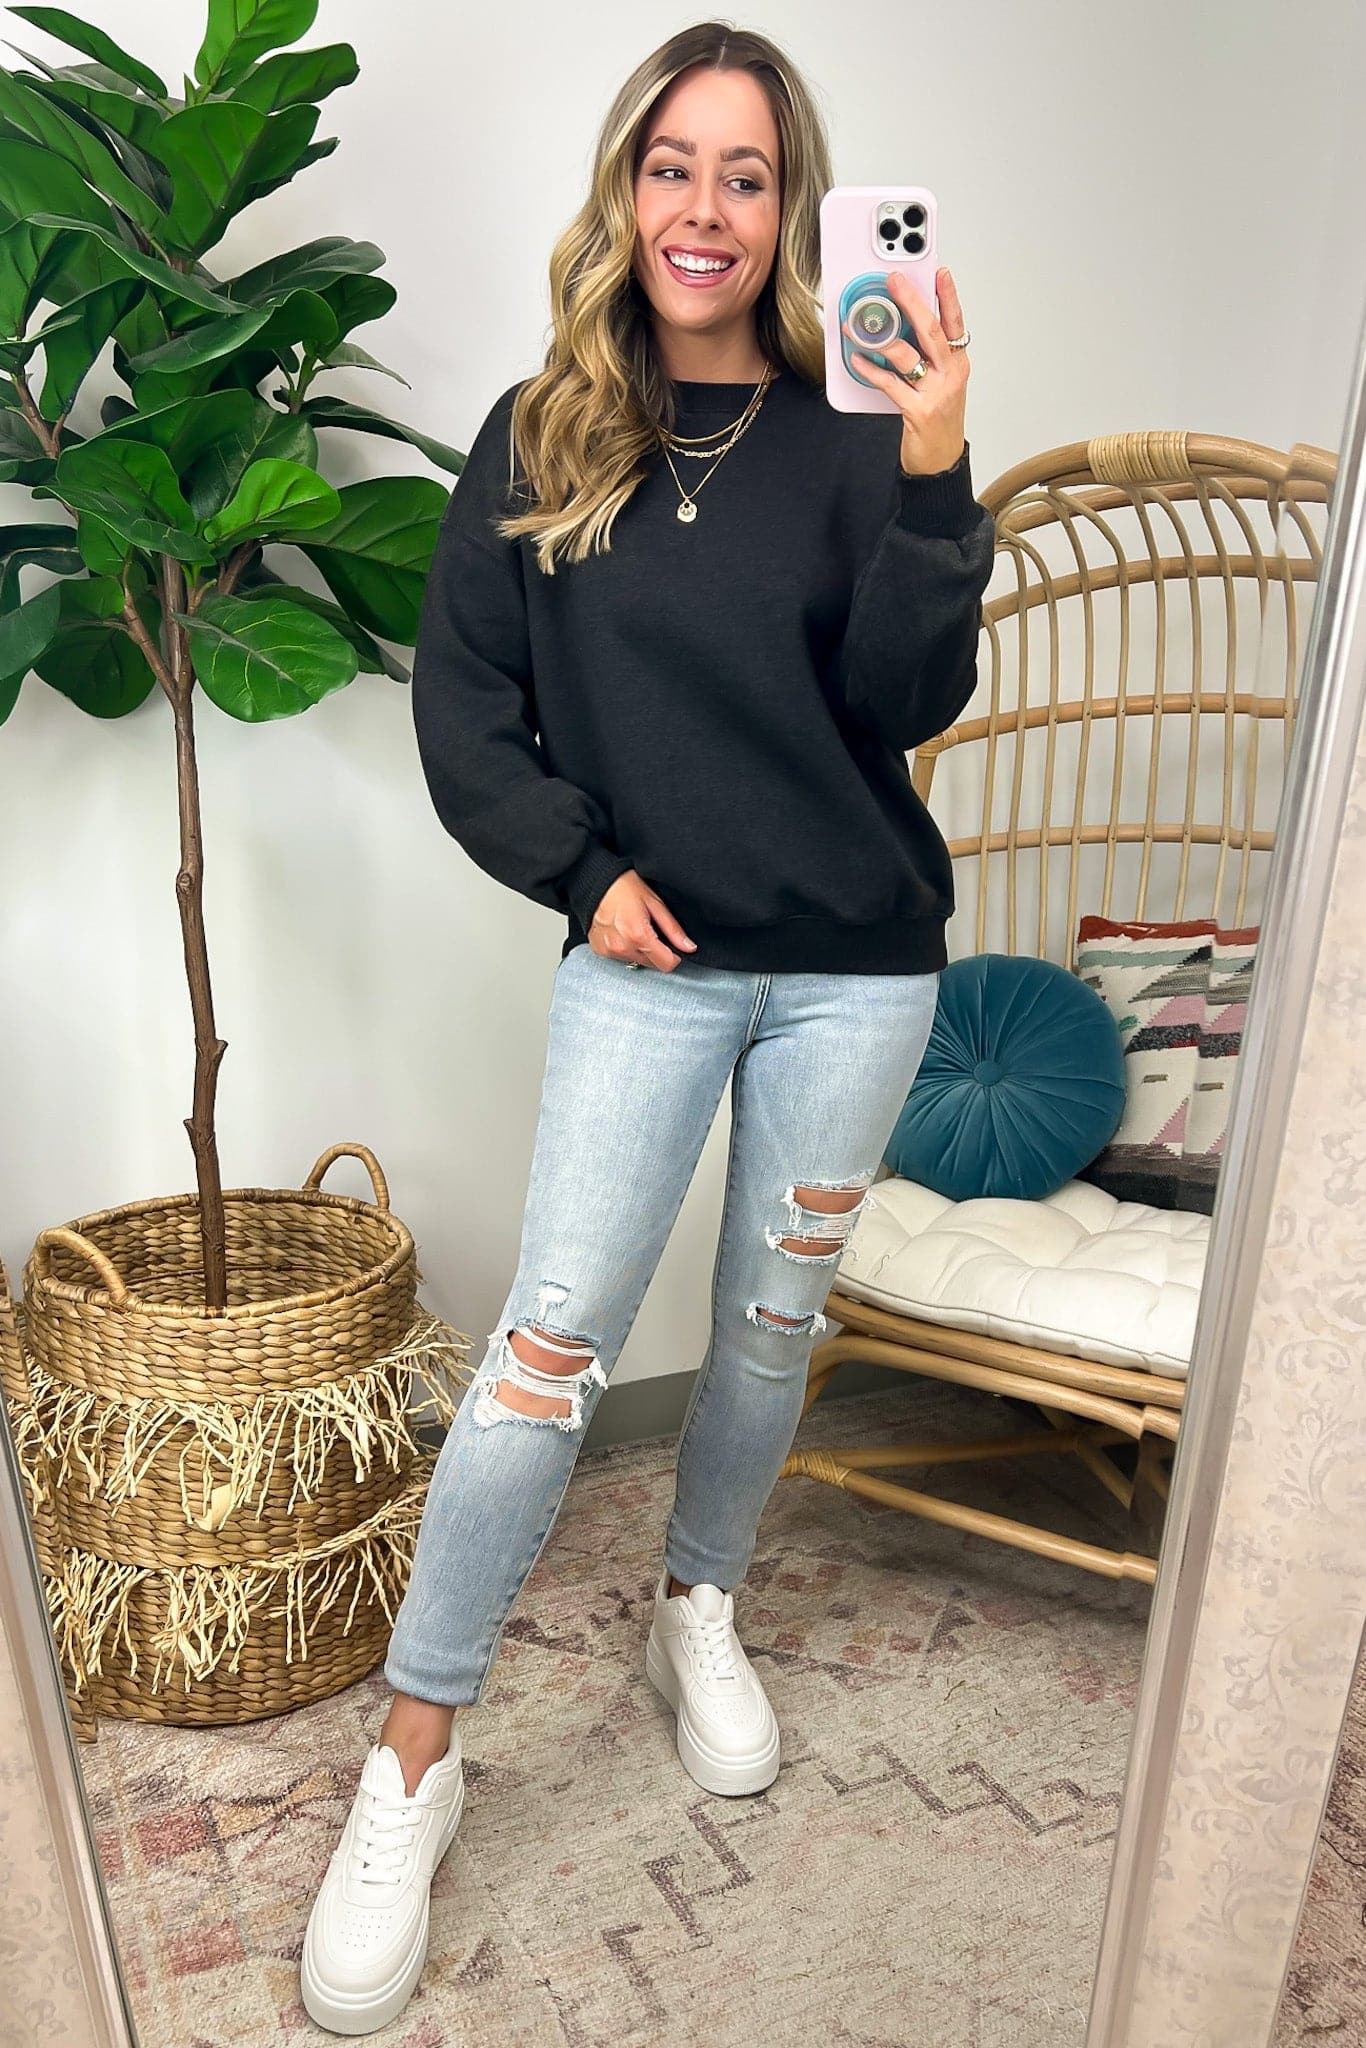  Nuvola Acid Wash Oversized Pullover - Madison and Mallory